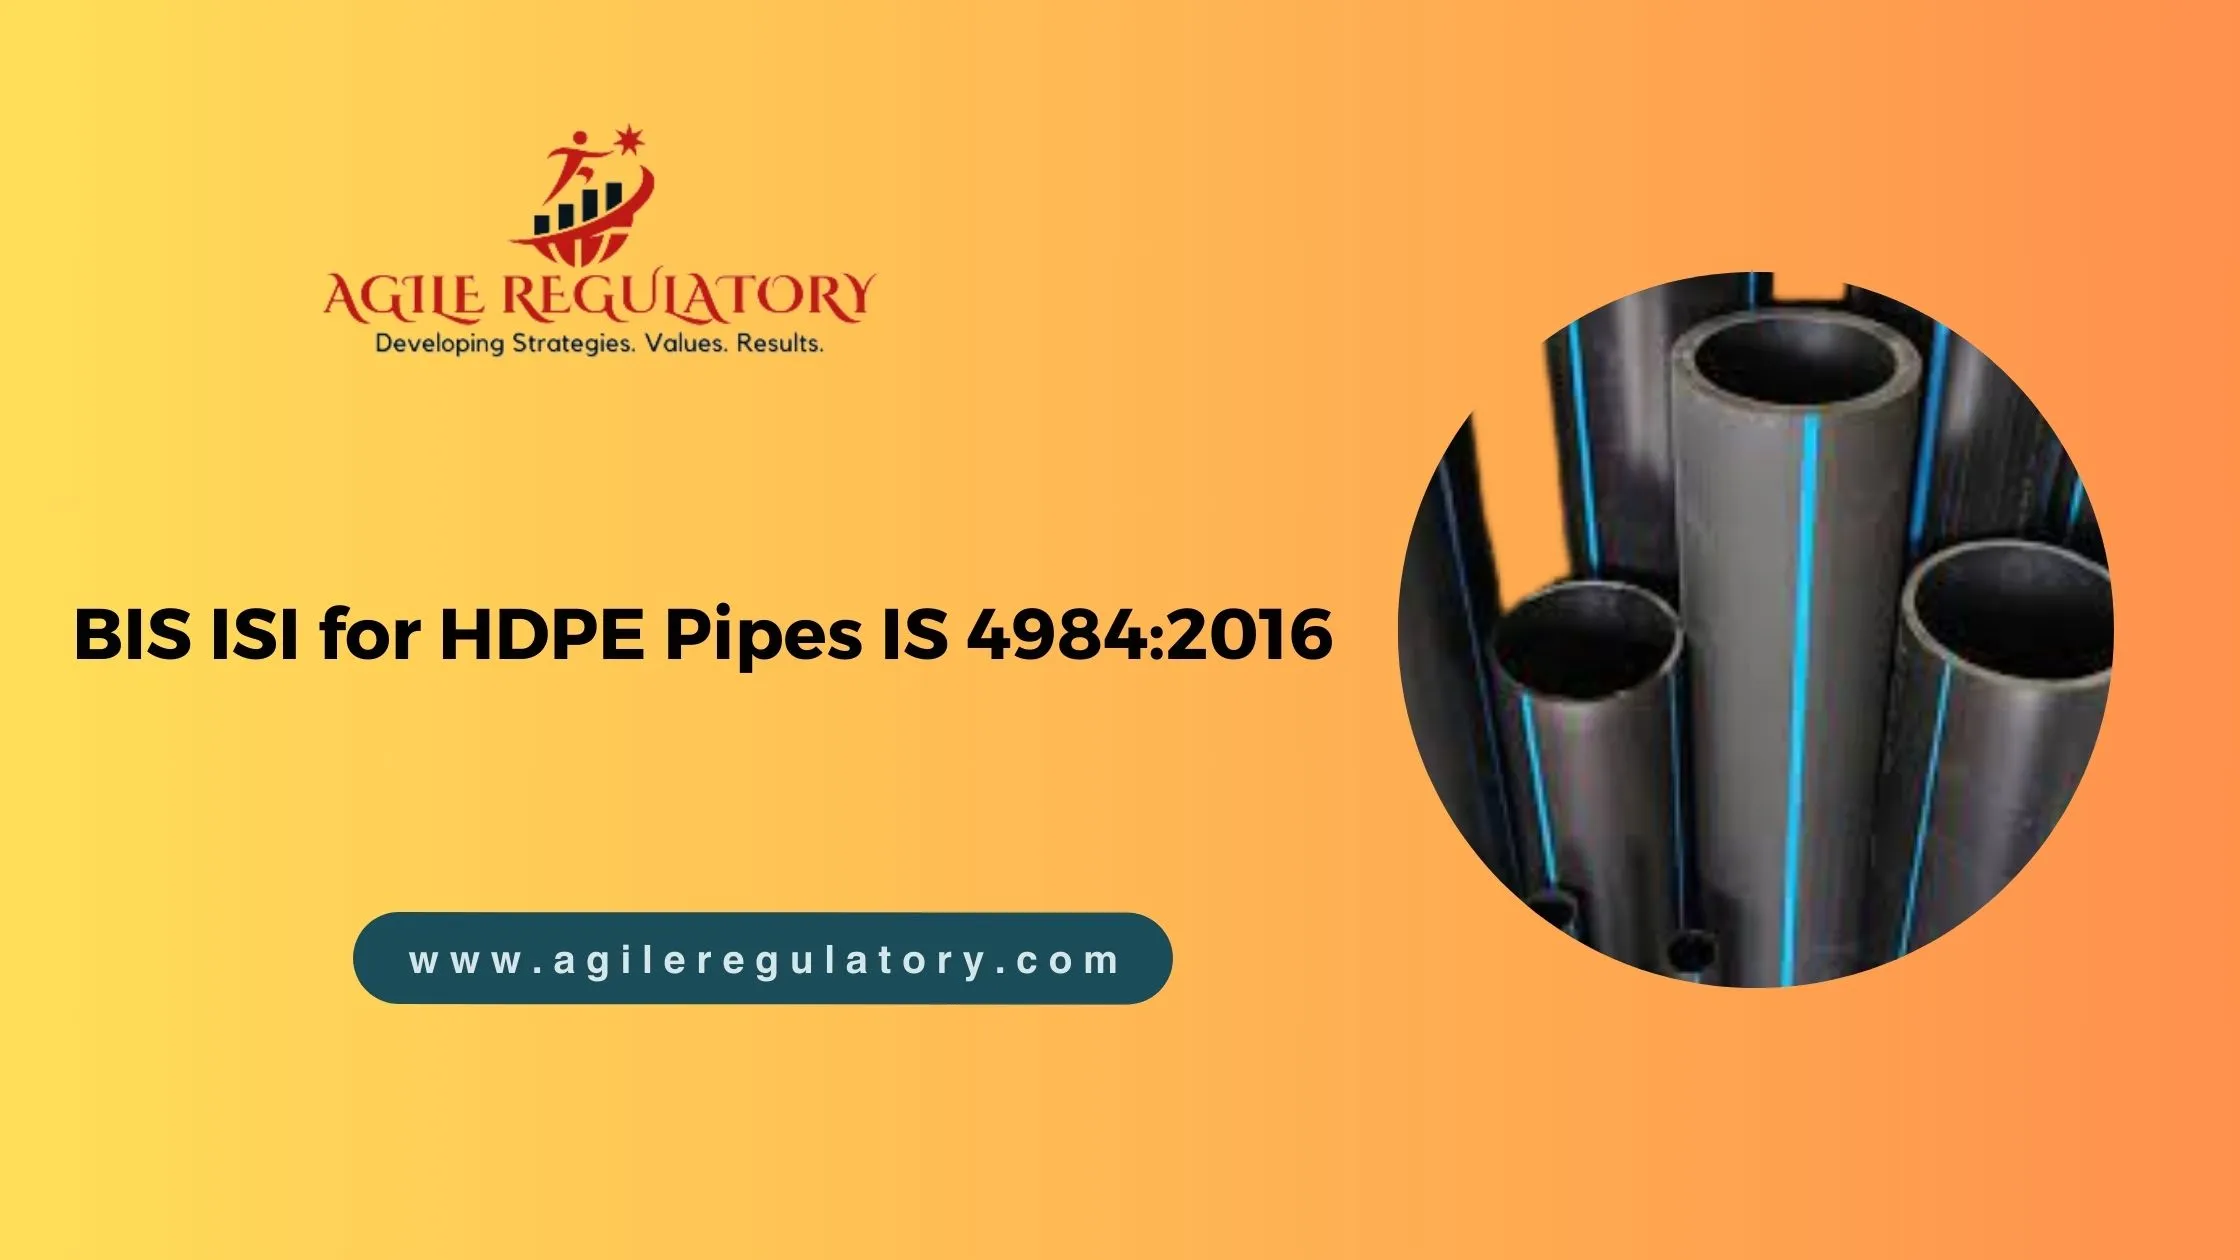 BIS ISI for HDPE Pipes (High Density Polyethylene) IS 4984: 2016